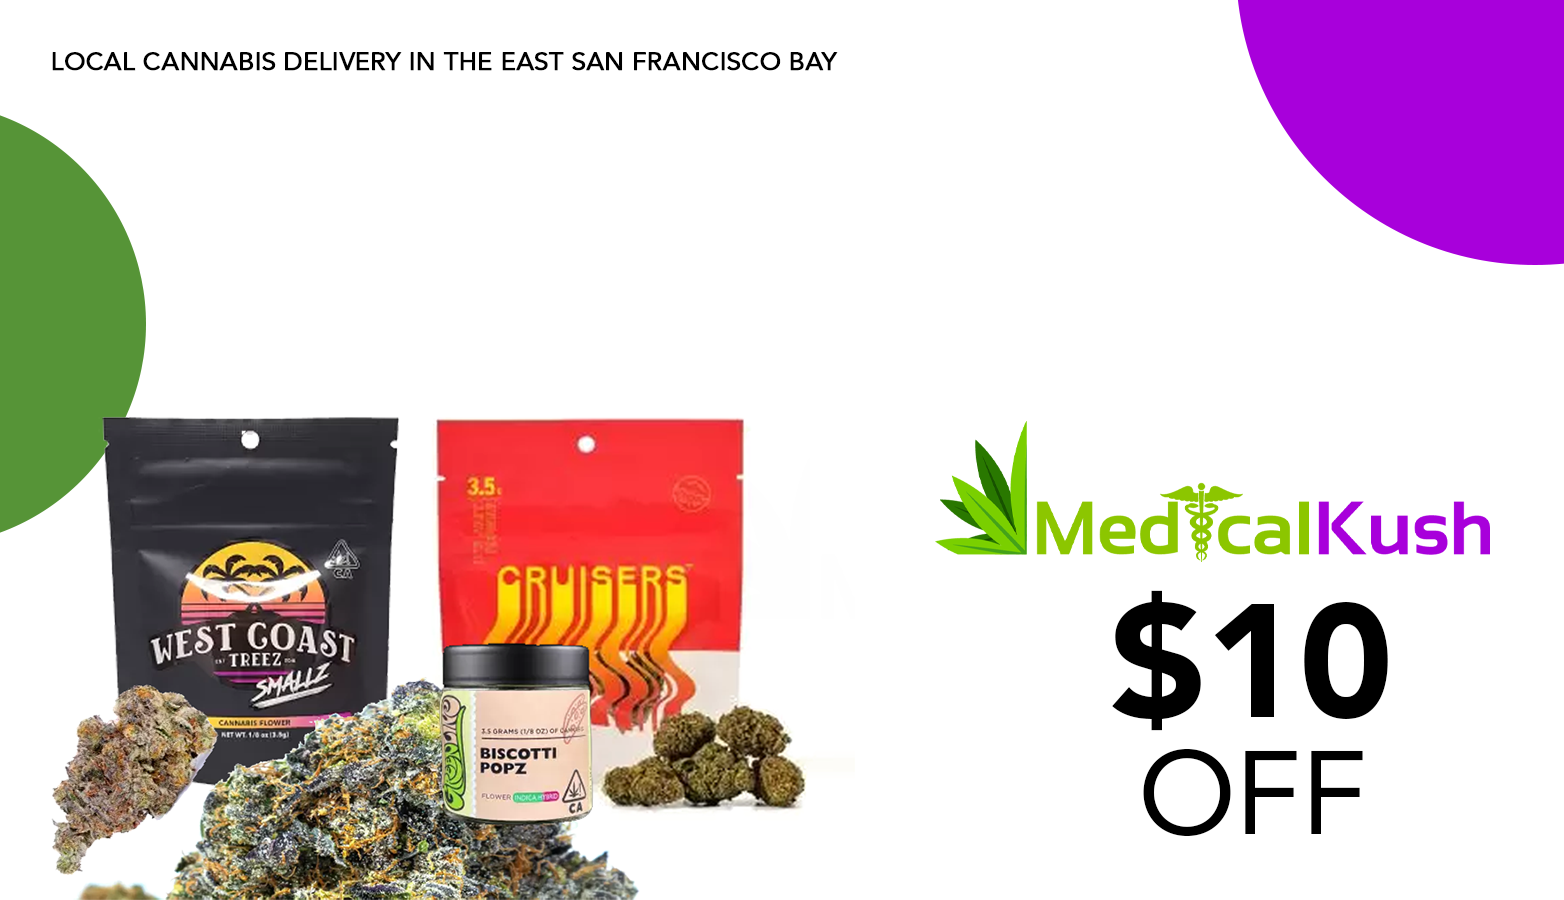 MedicalKush Delivery Coupon Code - SF East Bay Dispensary